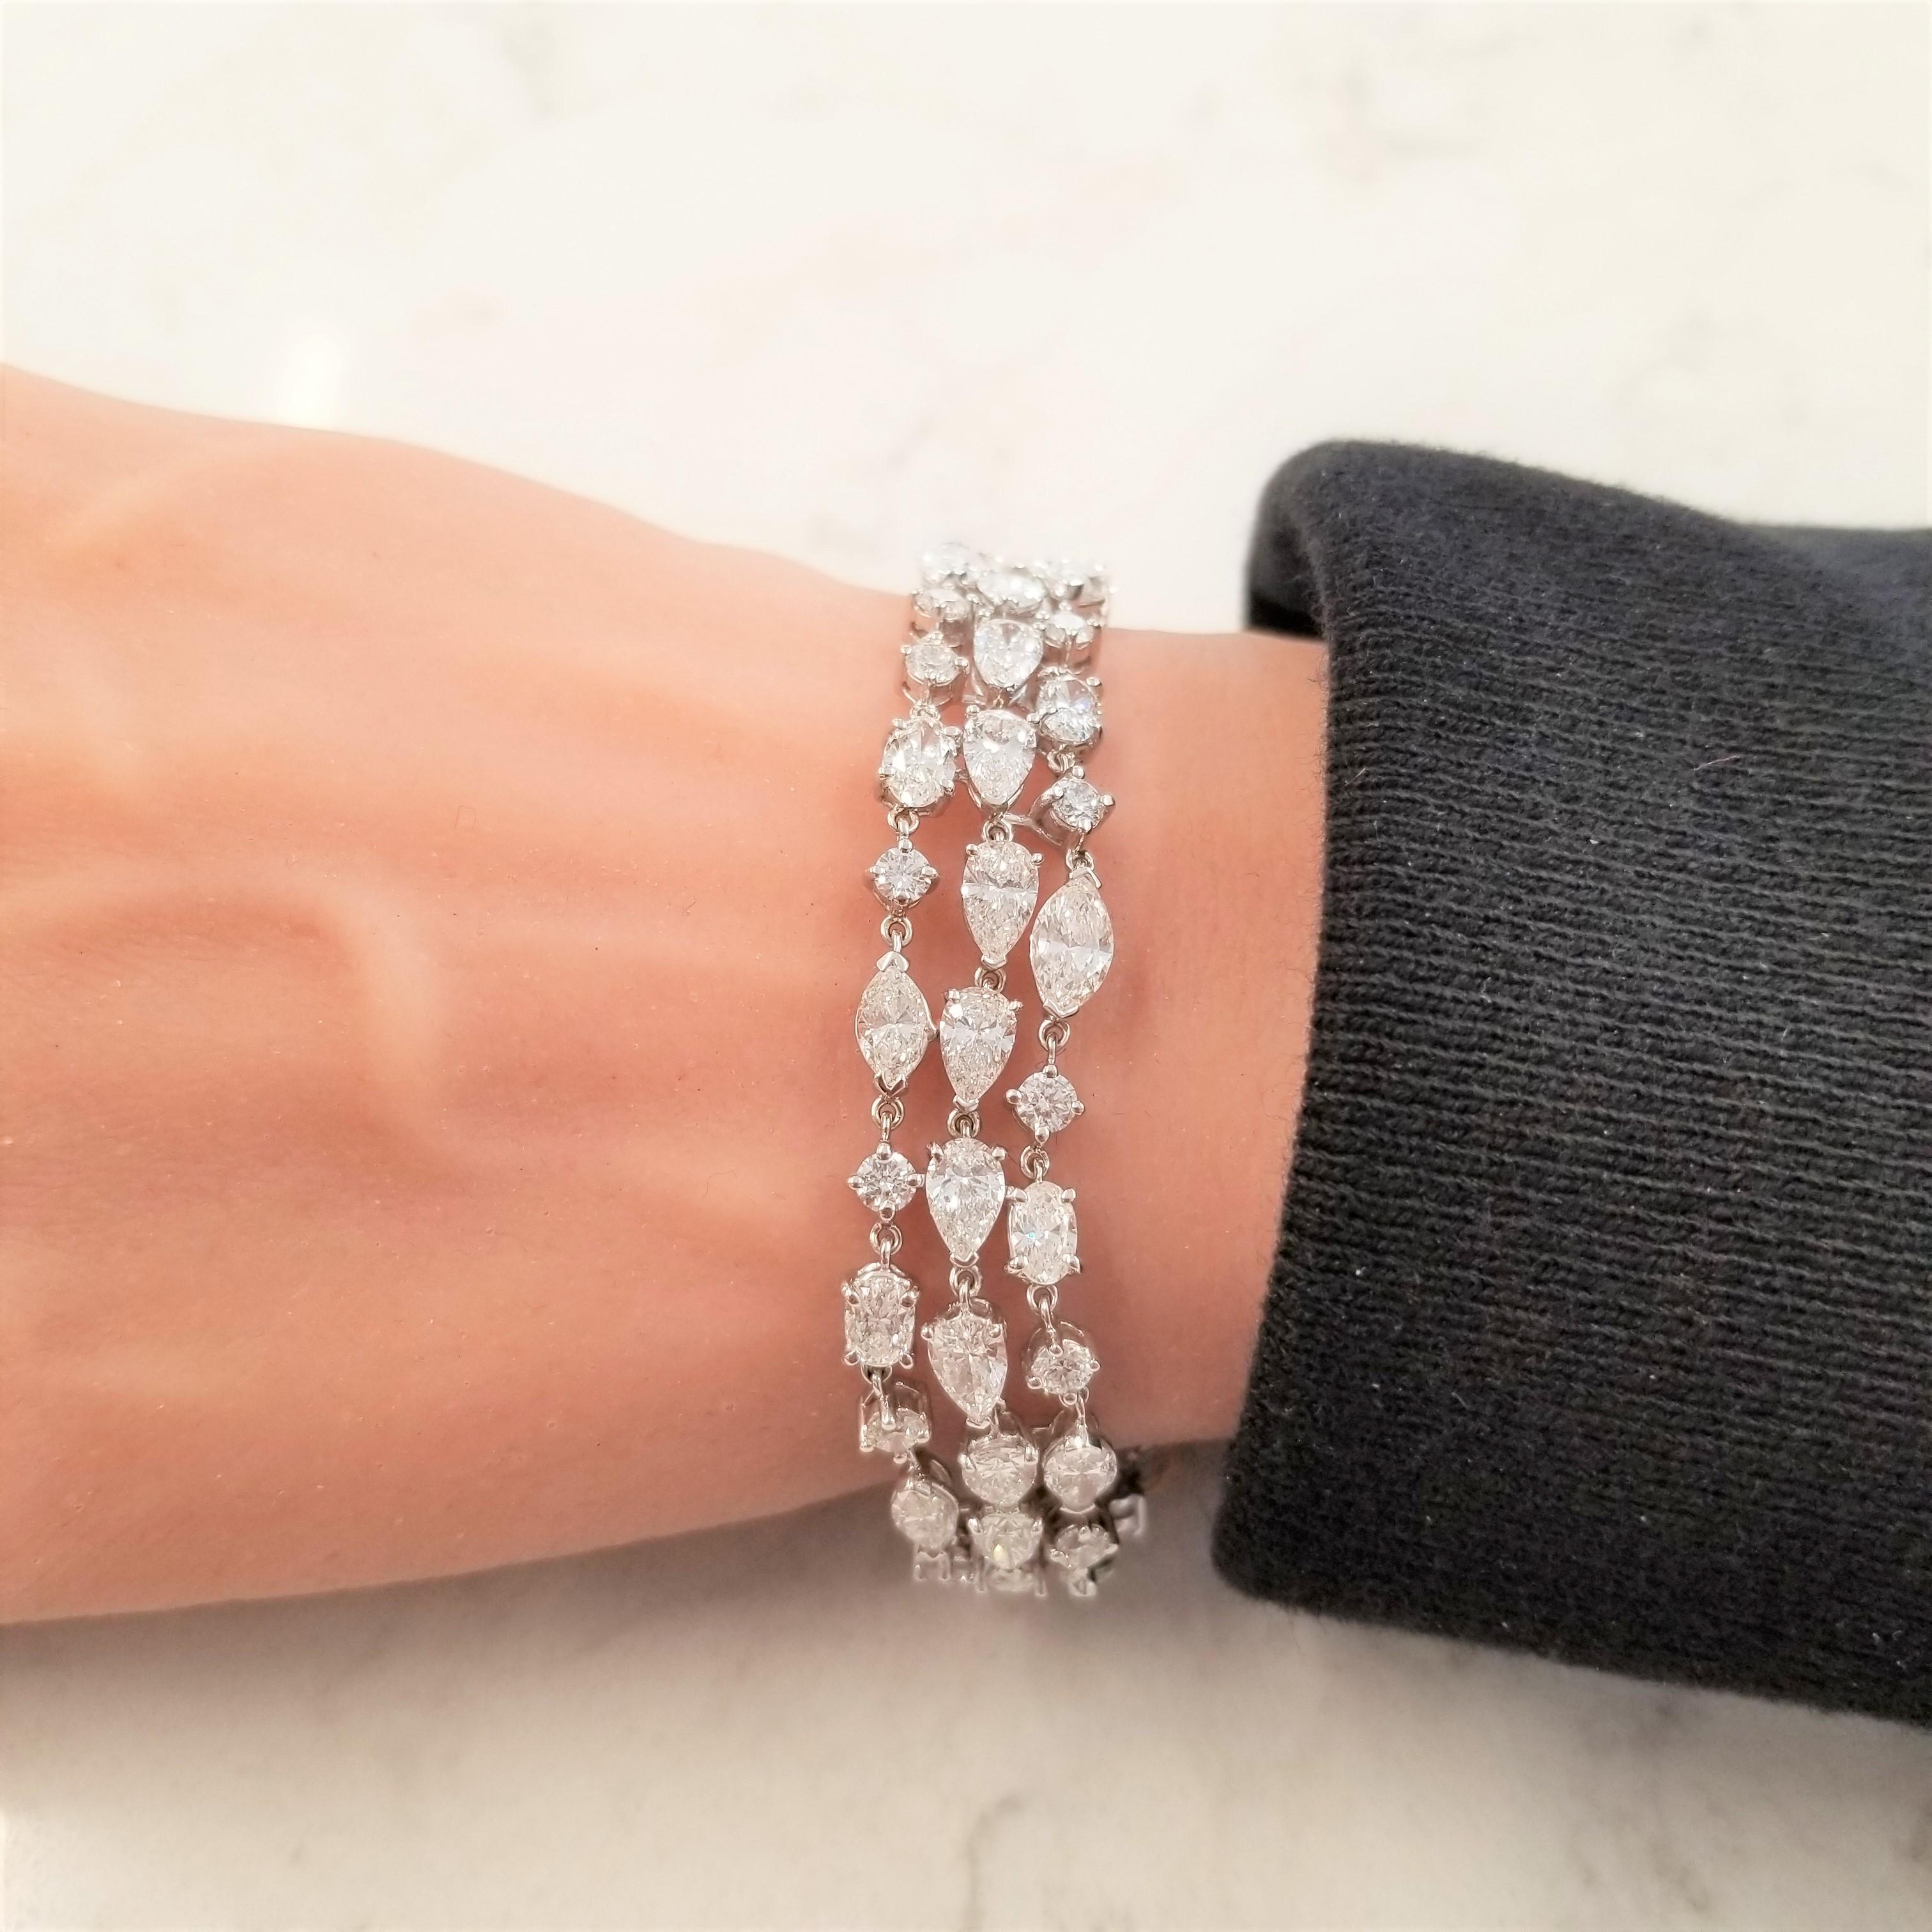 Pears, ovals, marquises, and round diamonds come together in pitch perfect harmony to create this spectacular diamond bracelet. Magnificently handcrafted in 18 karat white gold, this piece boasts a combined weight of 21.05 carat total weight. This